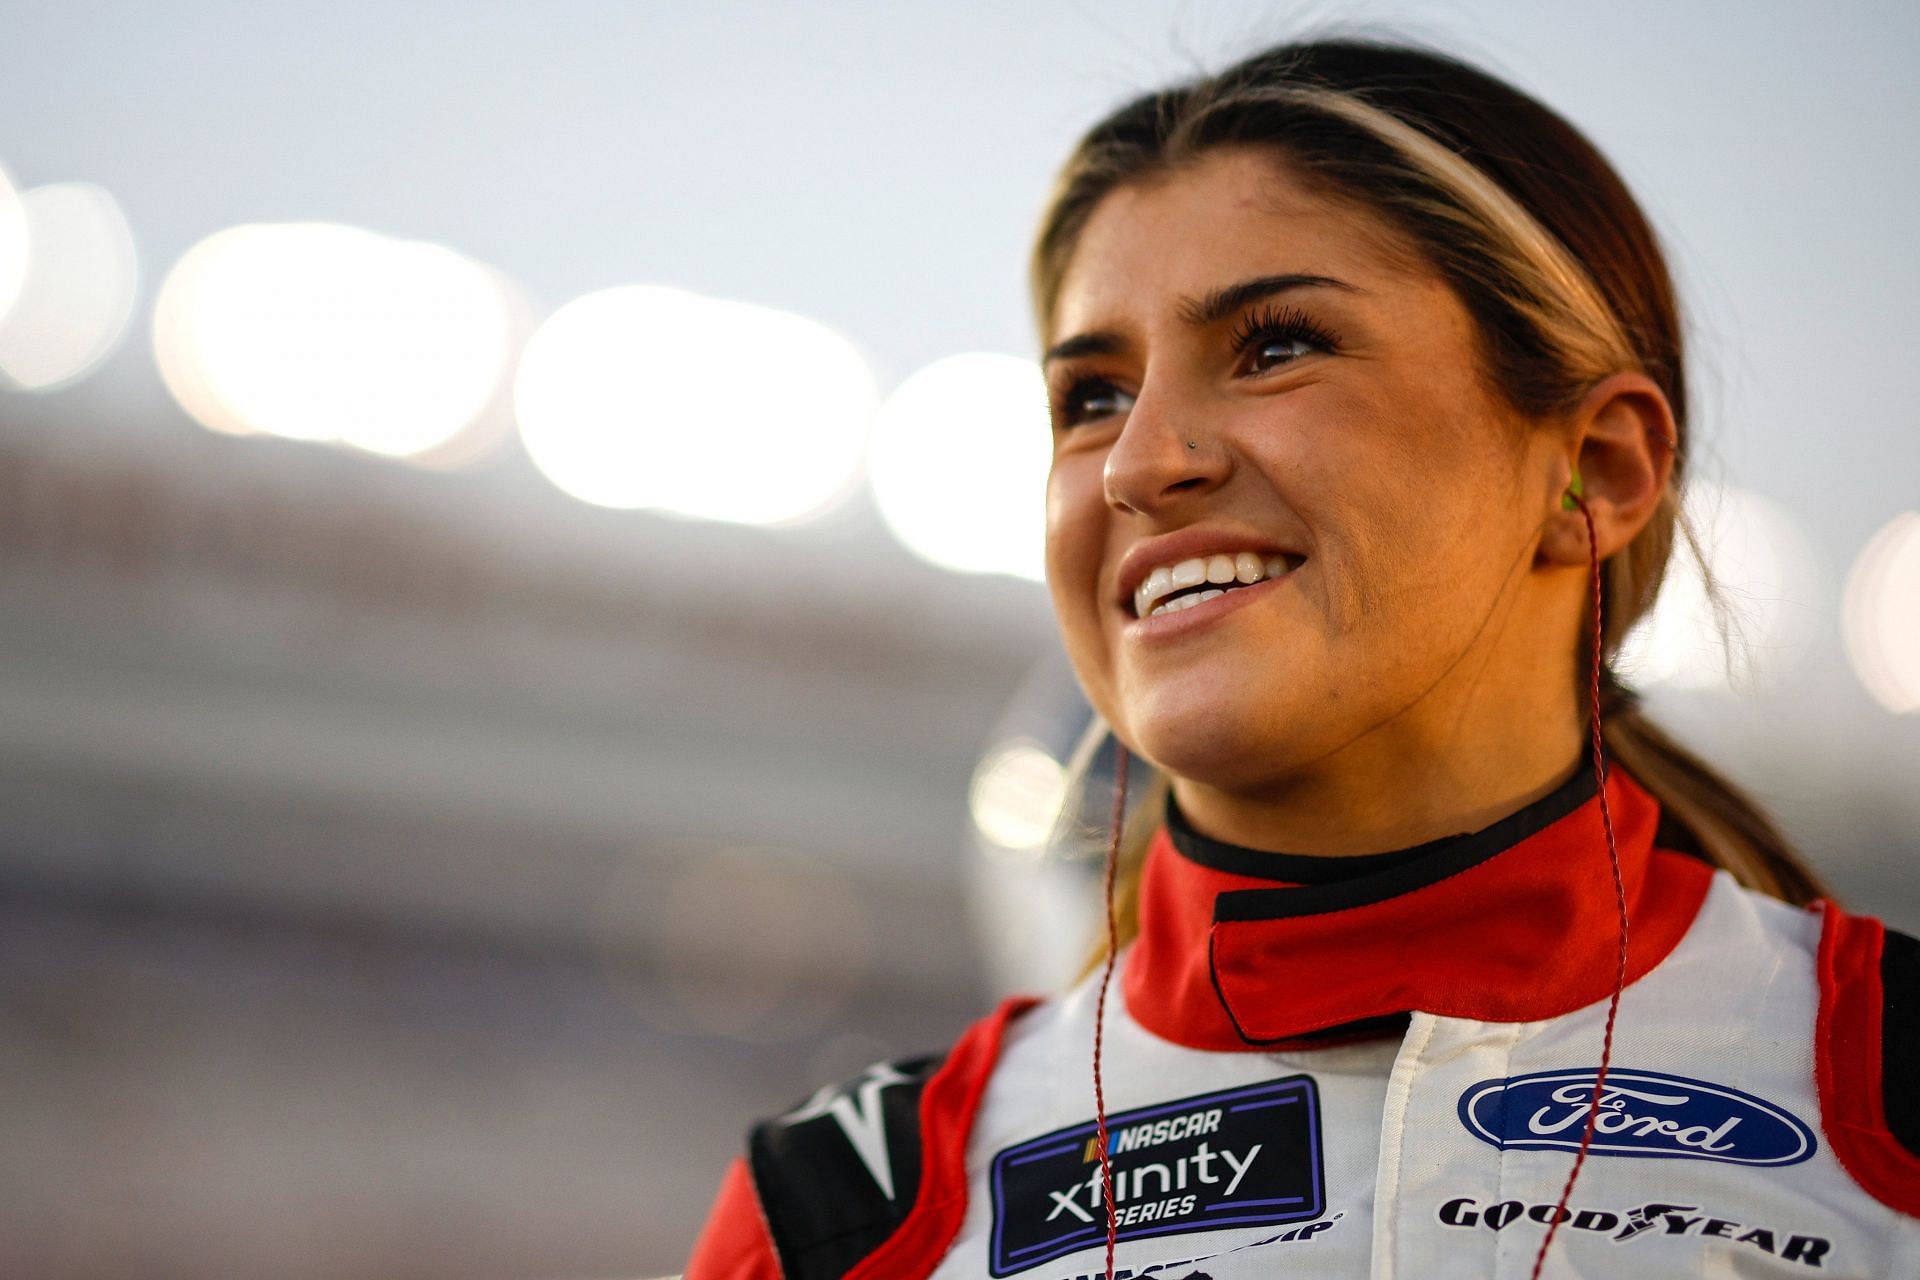 Hailie Deegan reacts on securing an impressive 8th-place finish in the Truck Series race at Talladega Superspeedway